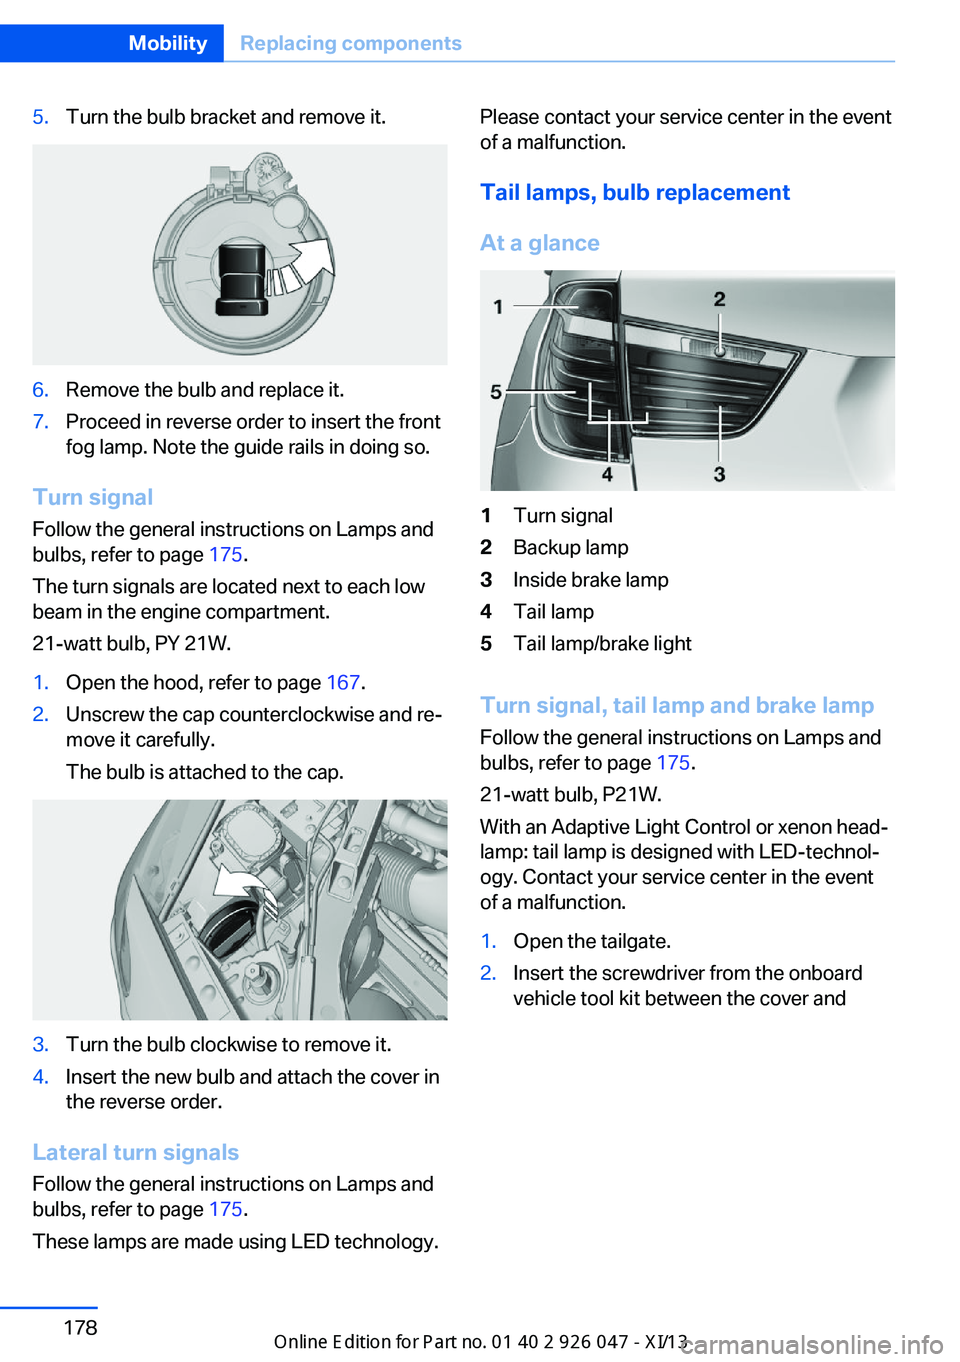 BMW X3 2013 F25 Owners Manual 5.Turn the bulb bracket and remove it.6.Remove the bulb and replace it.7.Proceed in reverse order to insert the front
fog lamp. Note the guide rails in doing so.
Turn signal
Follow the general instruc